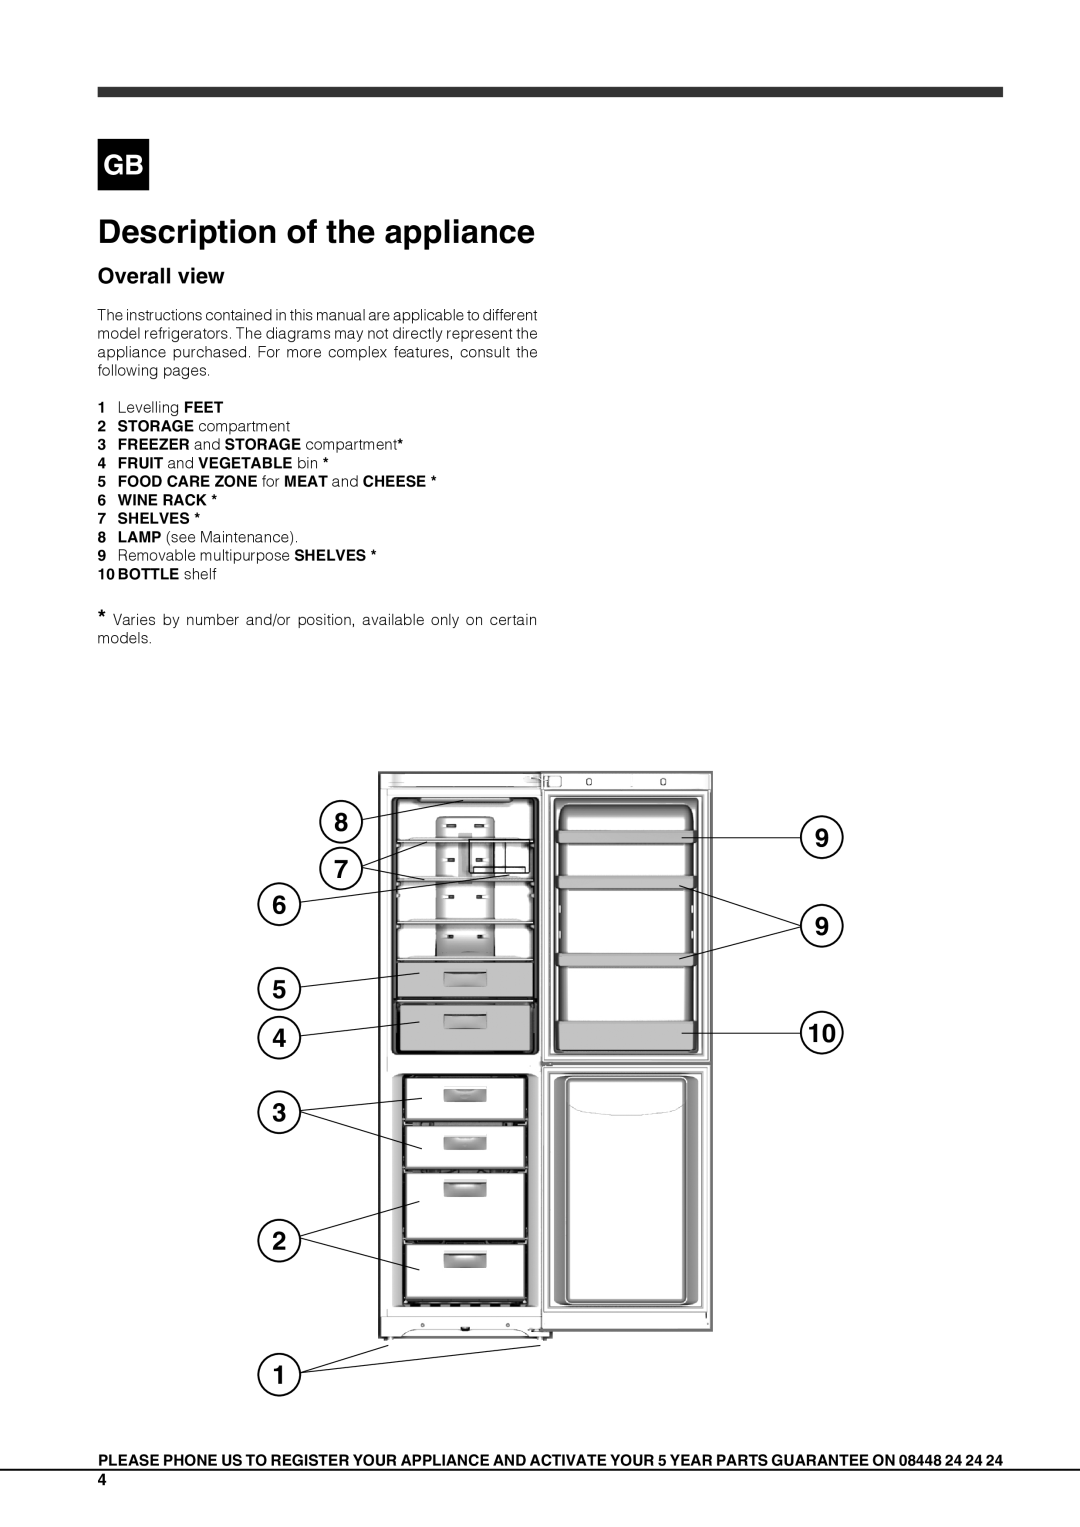 Hotpoint FFUQ 20xx x manual Description of the appliance, Overall view, Completo Ariston Essentia ChilVerd DISPLAY TIF 